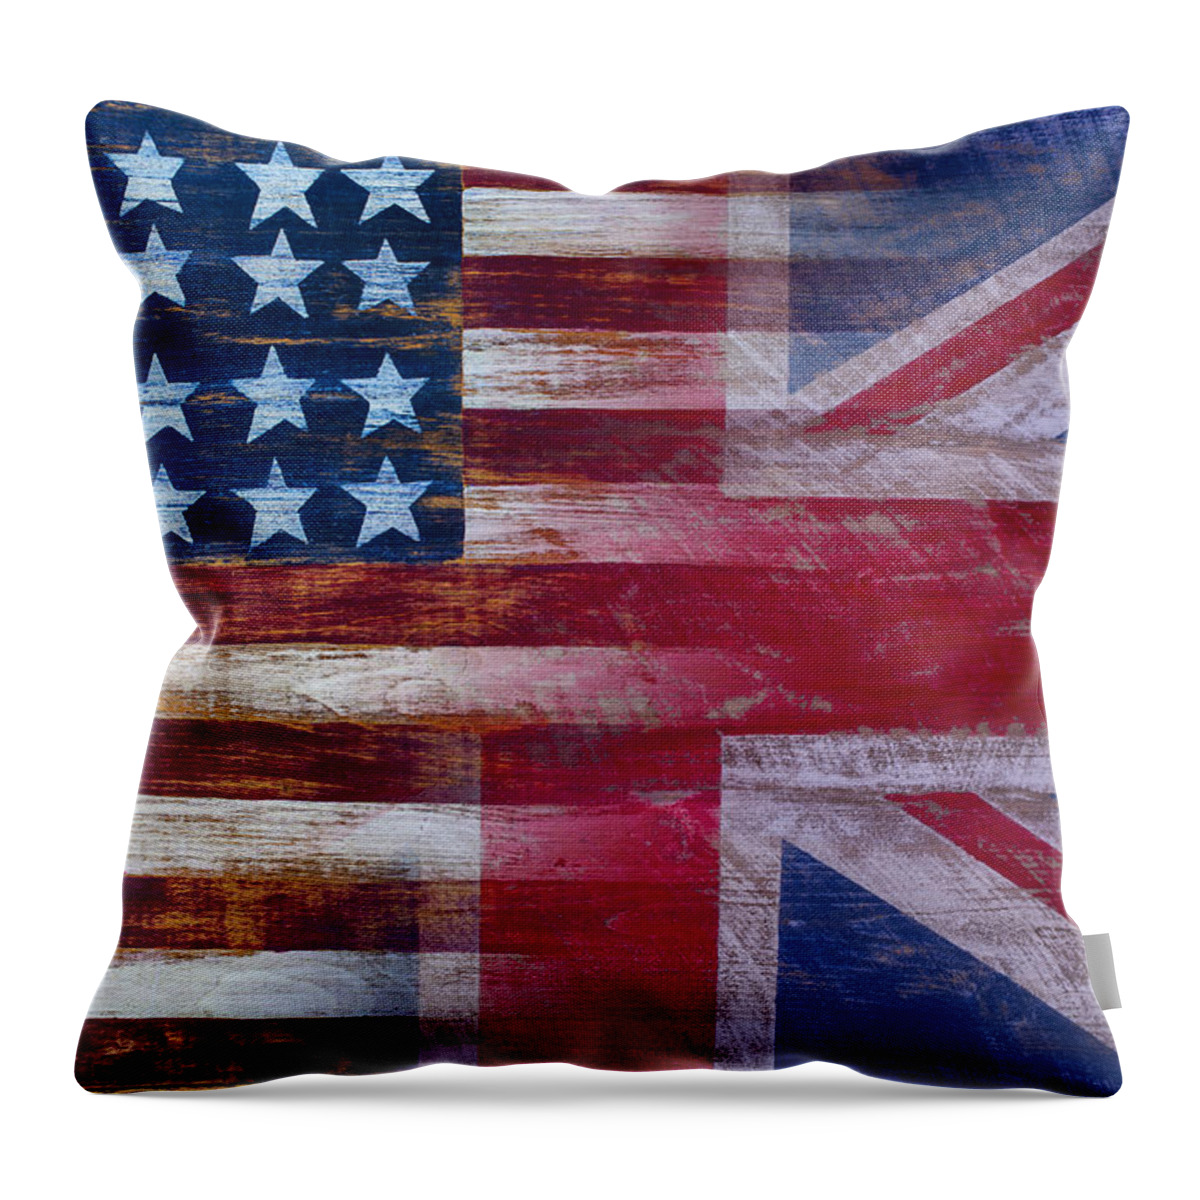 American Throw Pillow featuring the photograph American British Flag by Garry Gay